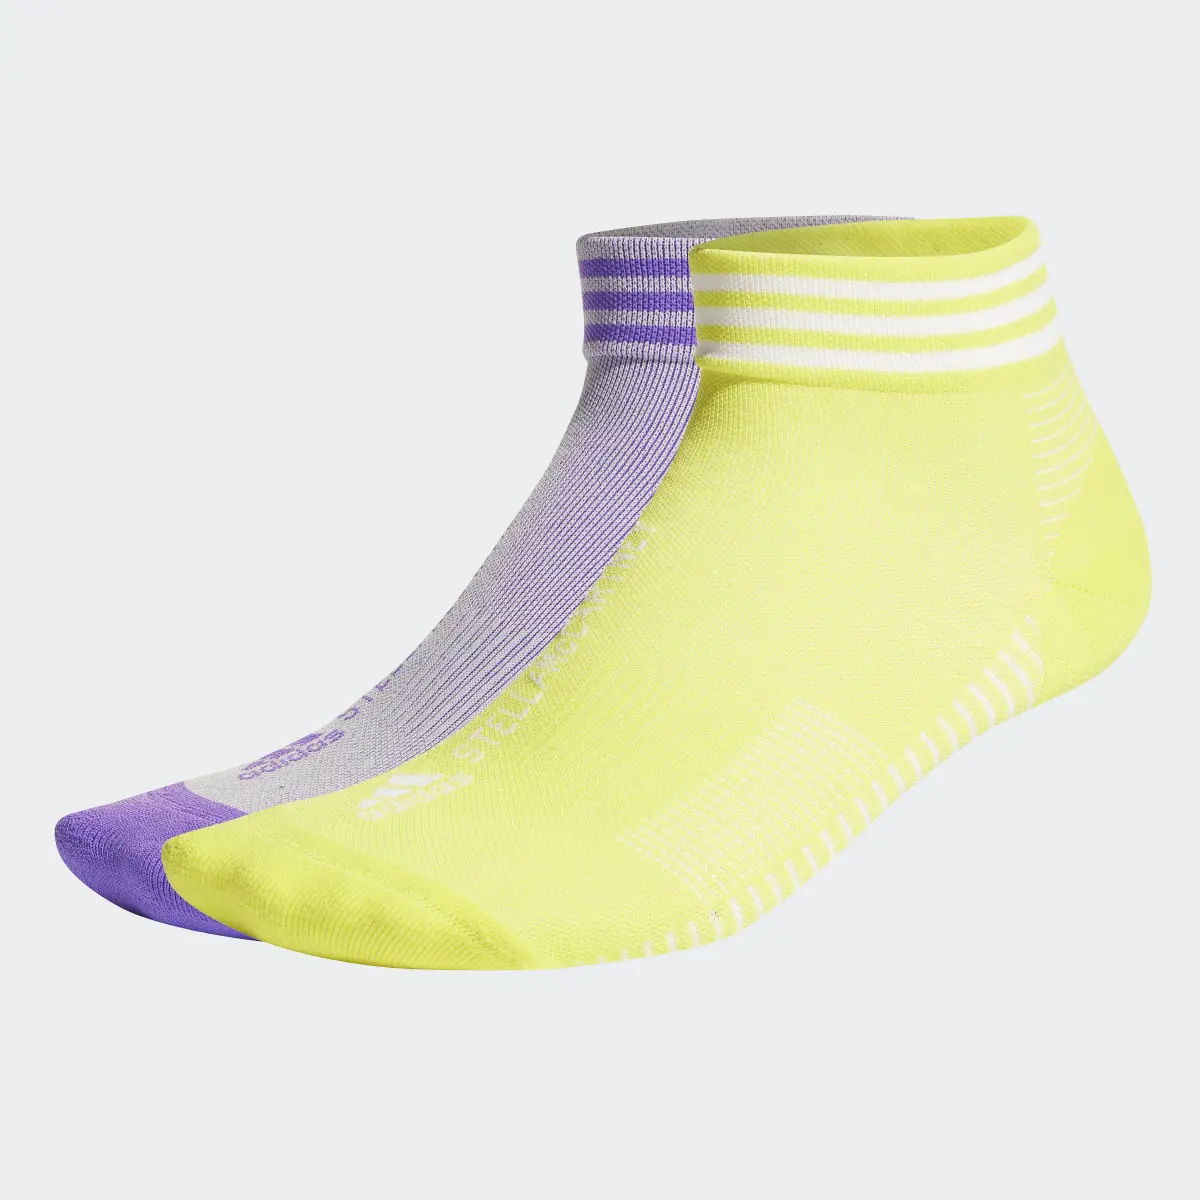 Adidas Chaussettes basses adidas by Stella McCartney (2 paires). 2